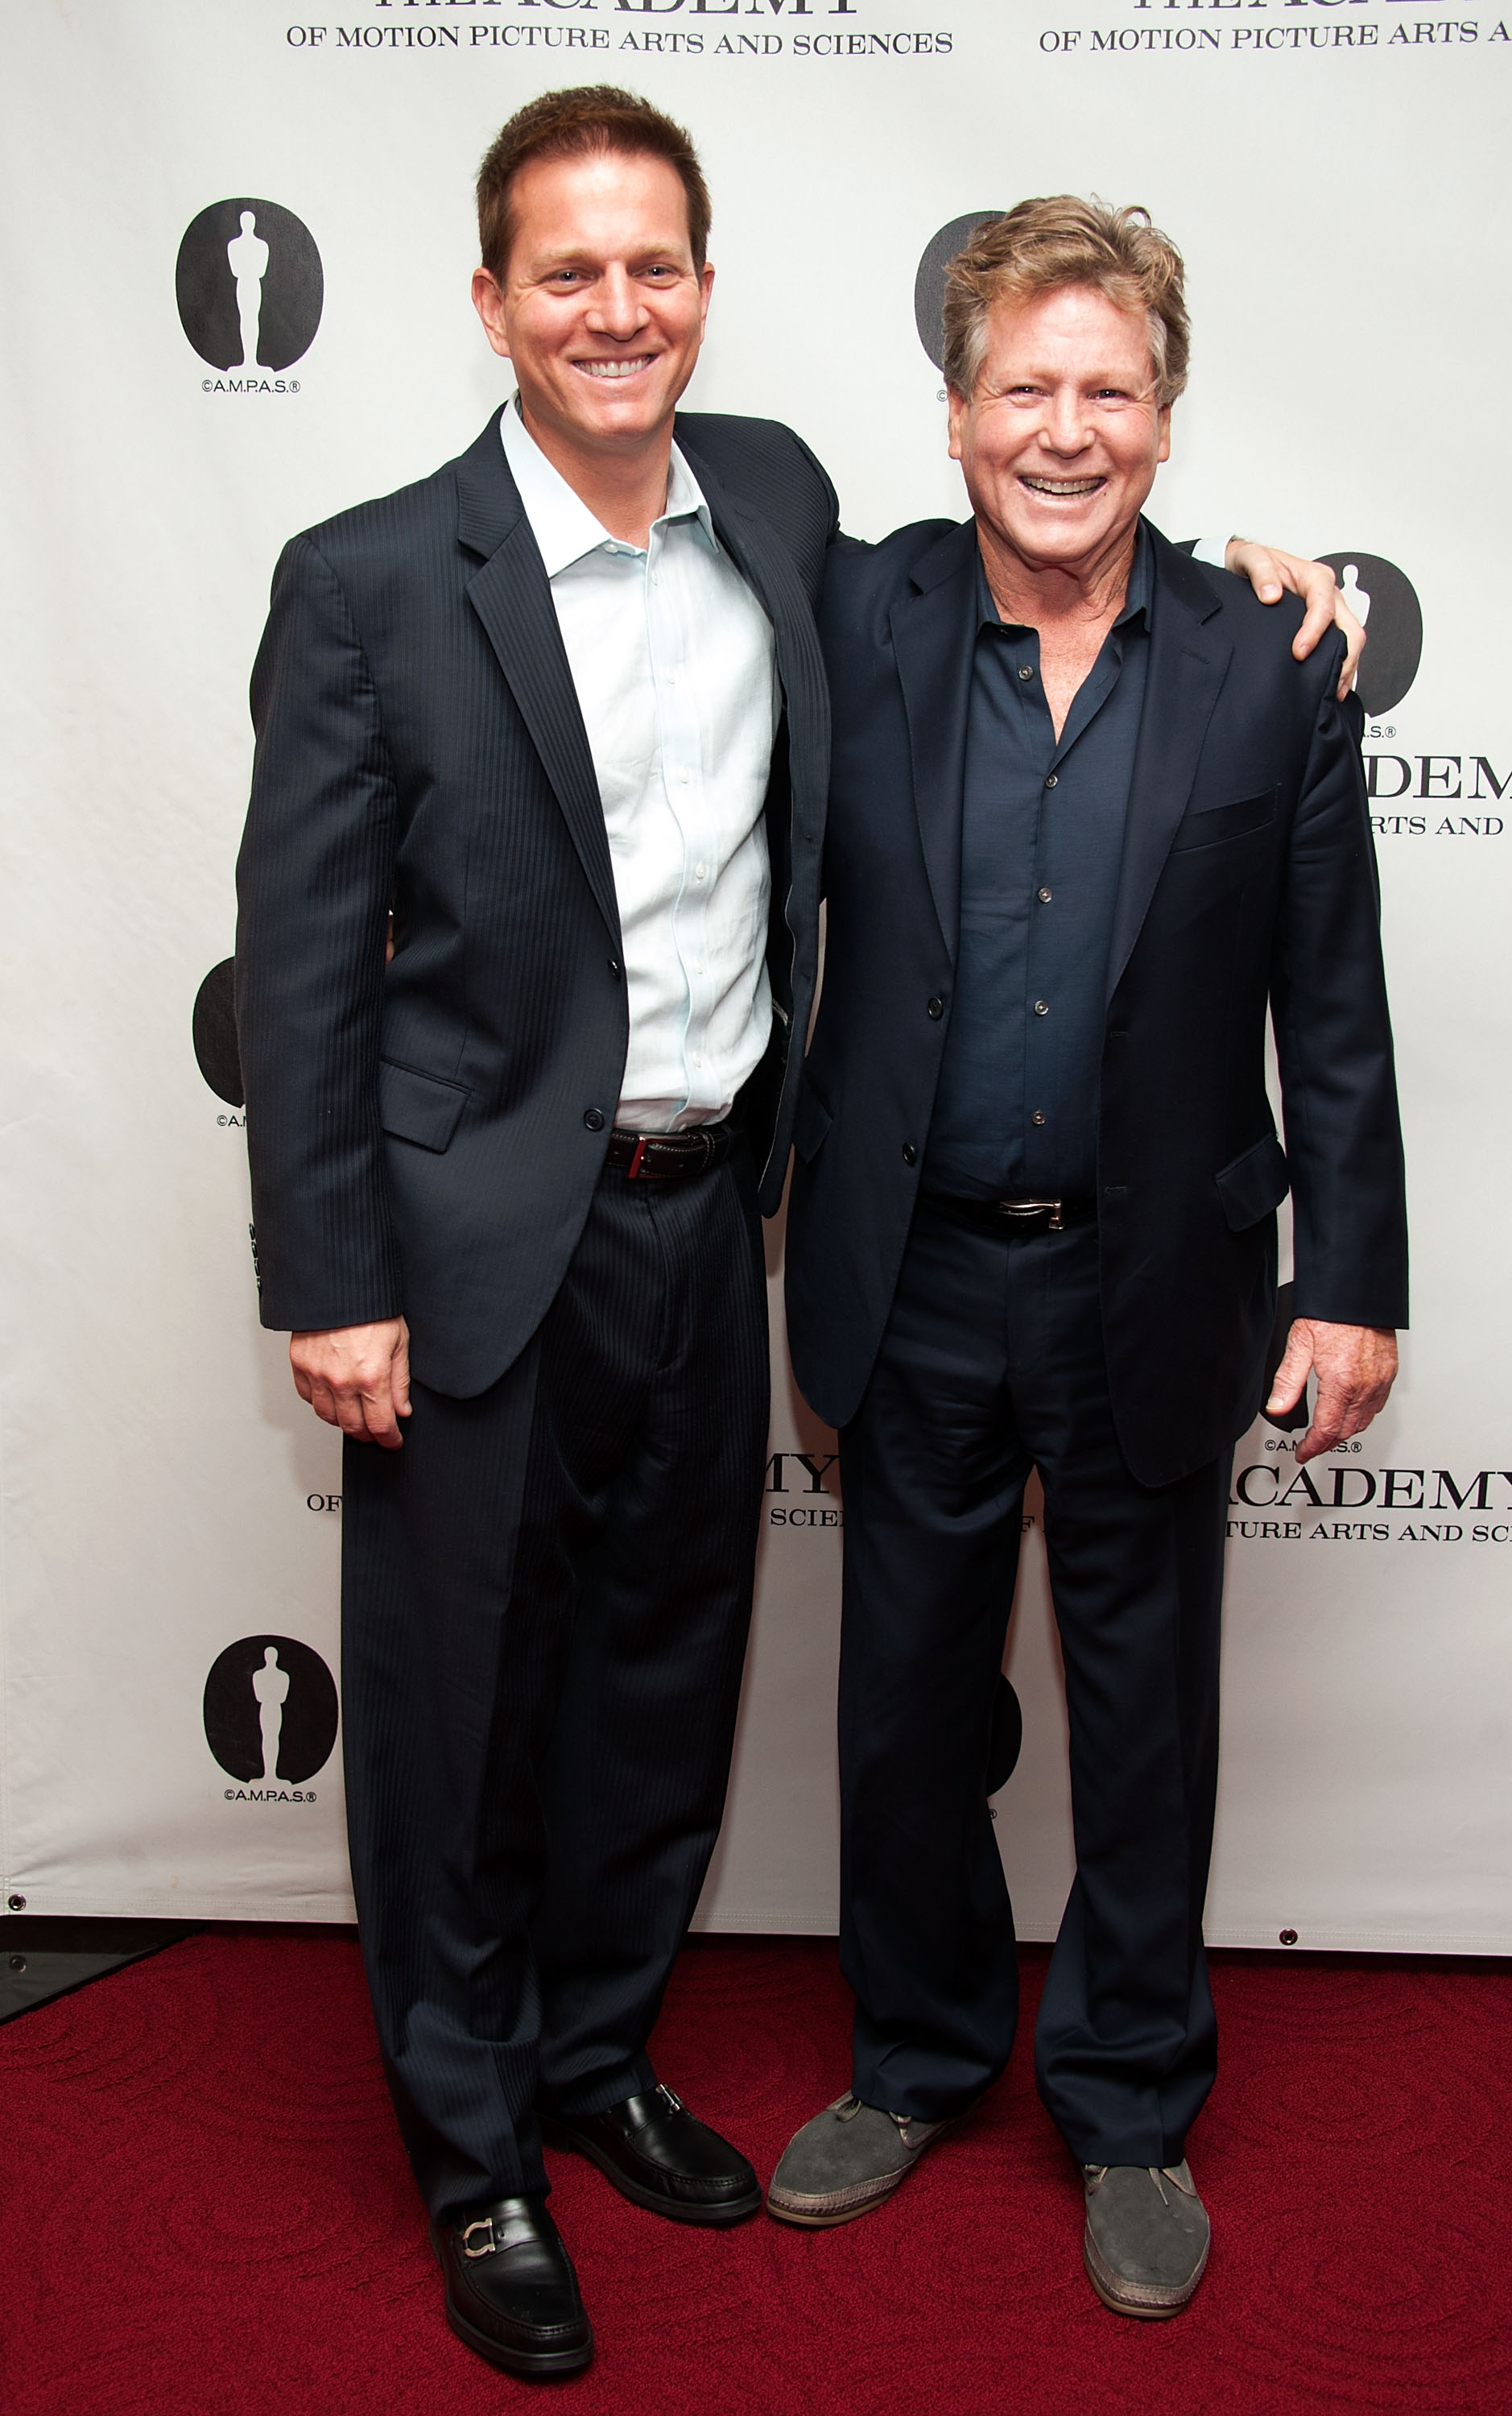 Patrick and Ryan O'Neal at AMPAS Samuel Goldwyn Theater on November 7, 2012 in Beverly Hills, California | Source: Getty Images